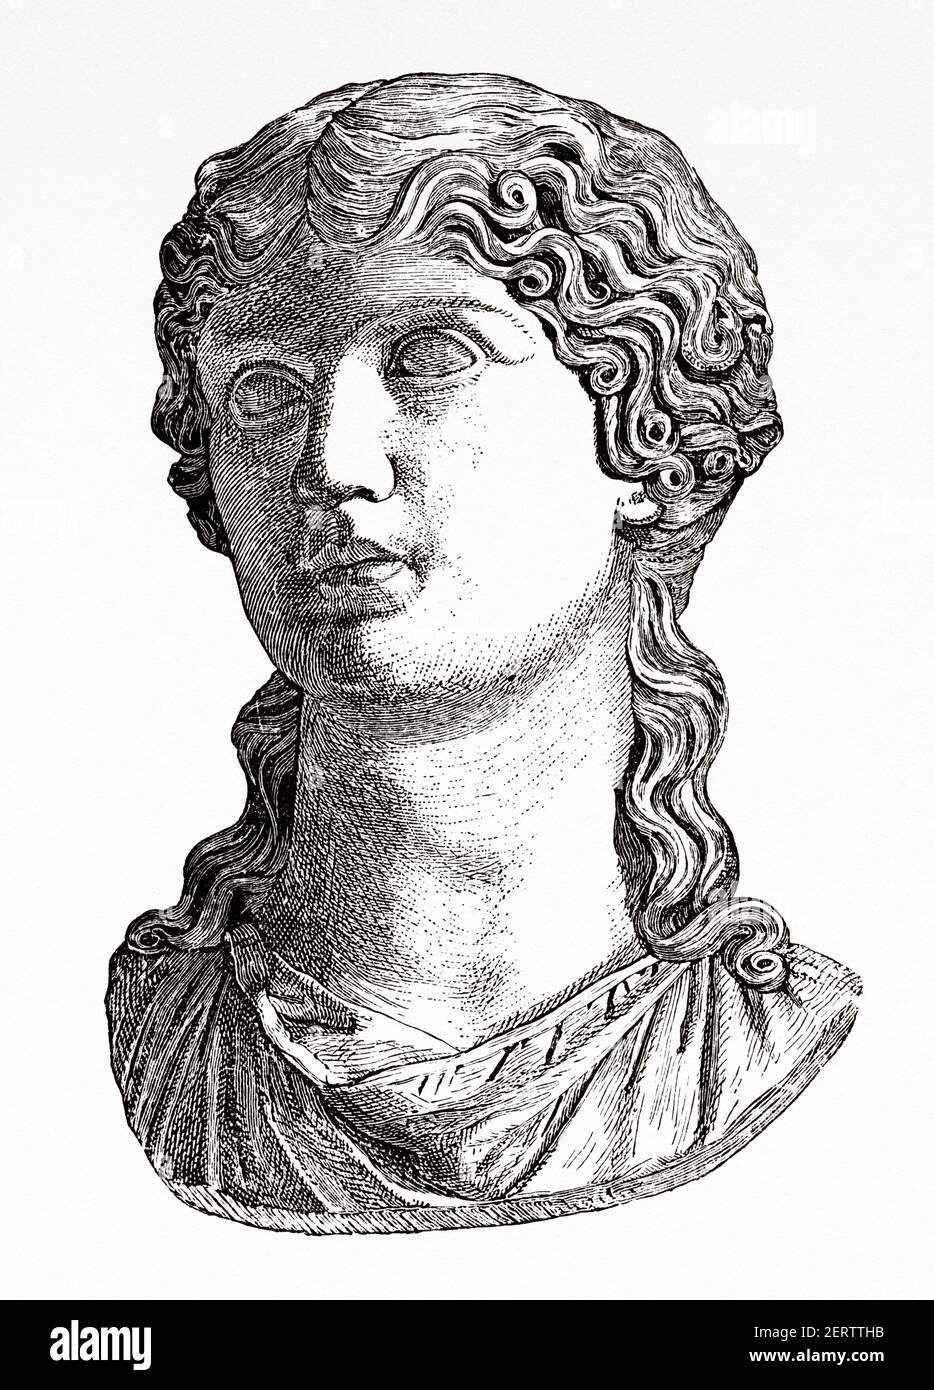 Agrippina (15-59) Roman Empress and one of the more prominent women in the Julio-Claudian dynasty, sister of Caligula, wife and niece of Claudius and mother of Nero, Ancient Rome, Ancient roman empire. Italy, Europe. Old 19th century engraved illustration, El Mundo Ilustrado 1881 Stock Photo